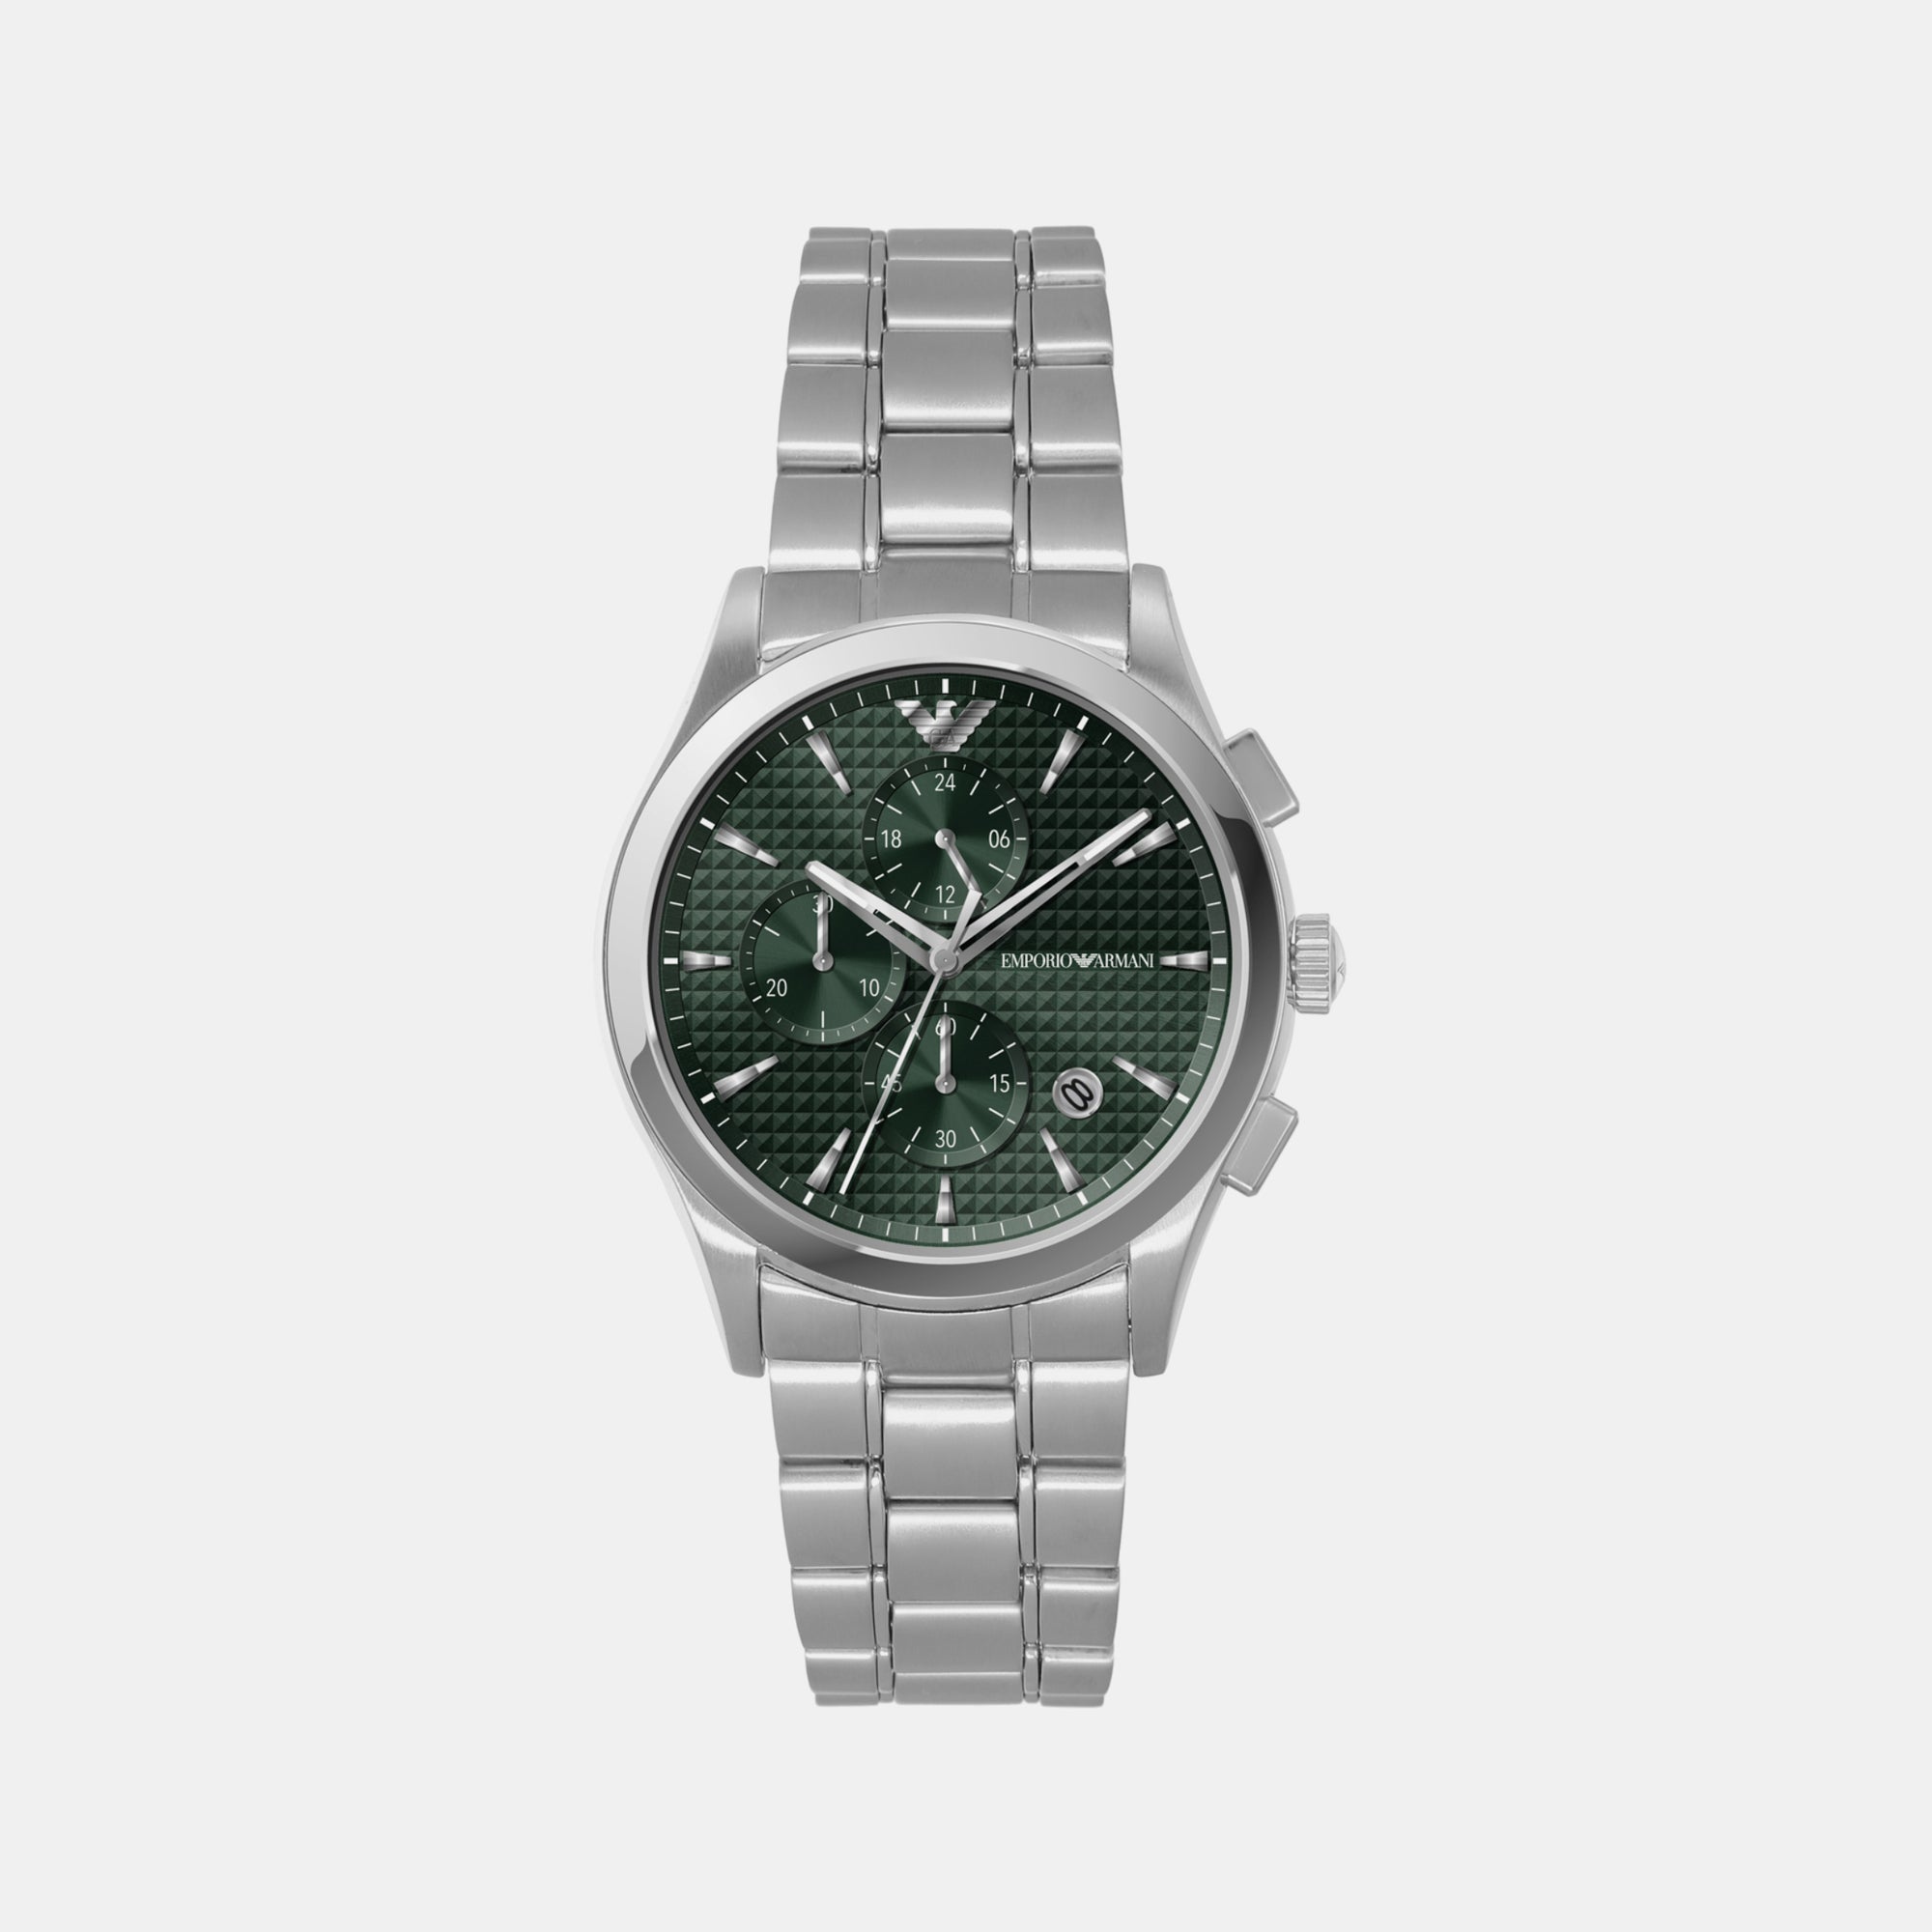 Male Green Chronograph Stainless Steel Watch AR11529 – Just In Time